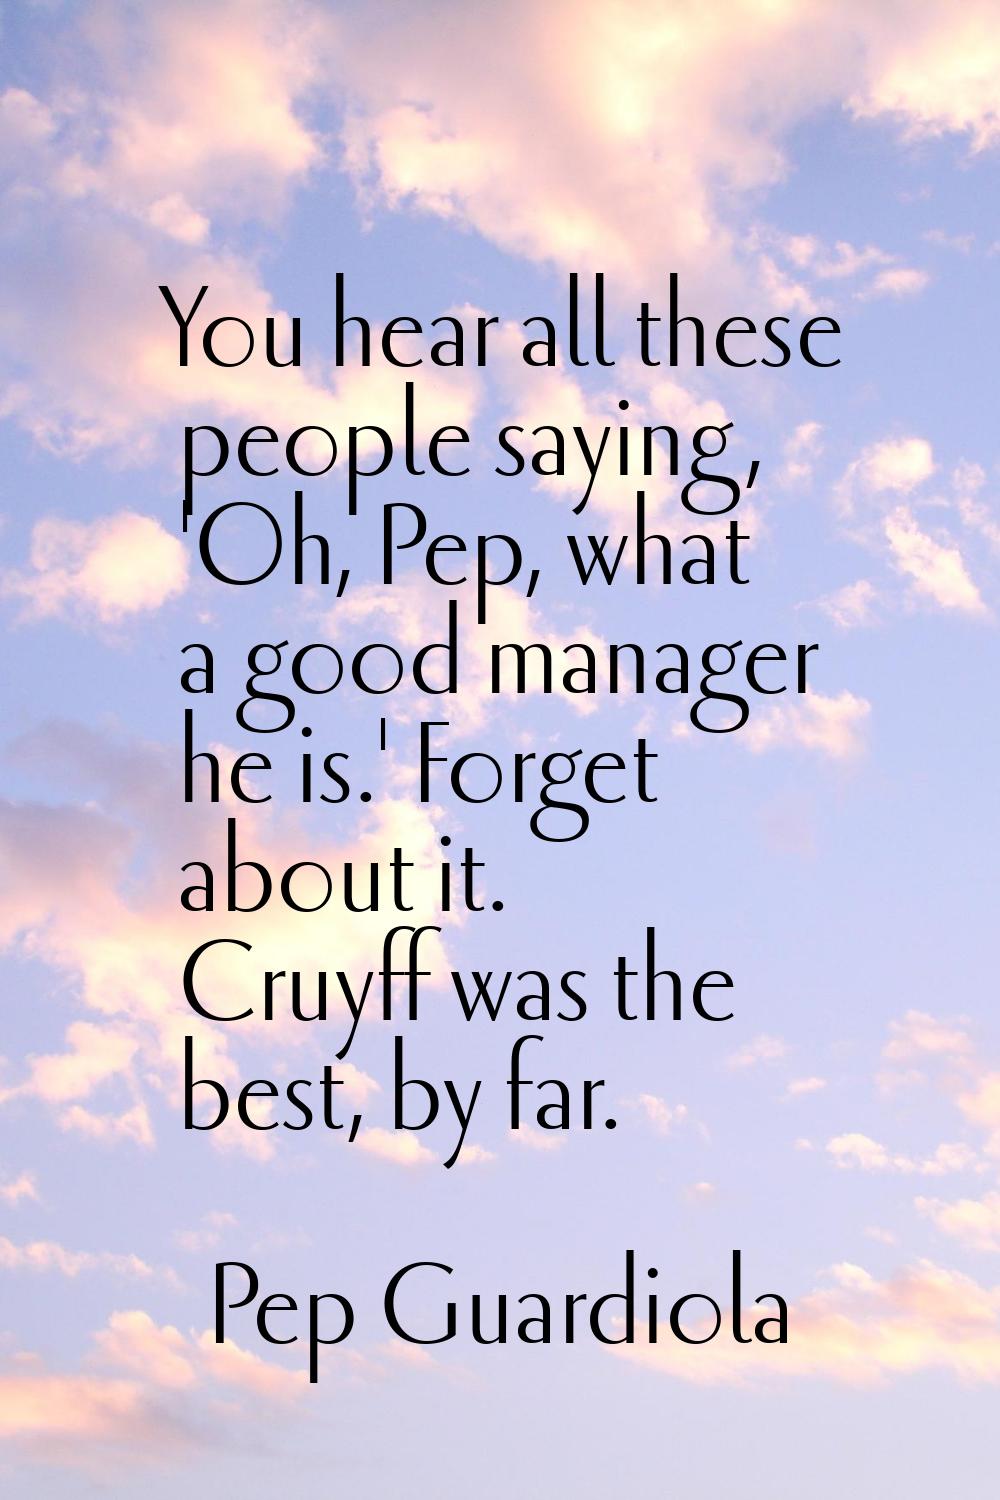 You hear all these people saying, 'Oh, Pep, what a good manager he is.' Forget about it. Cruyff was